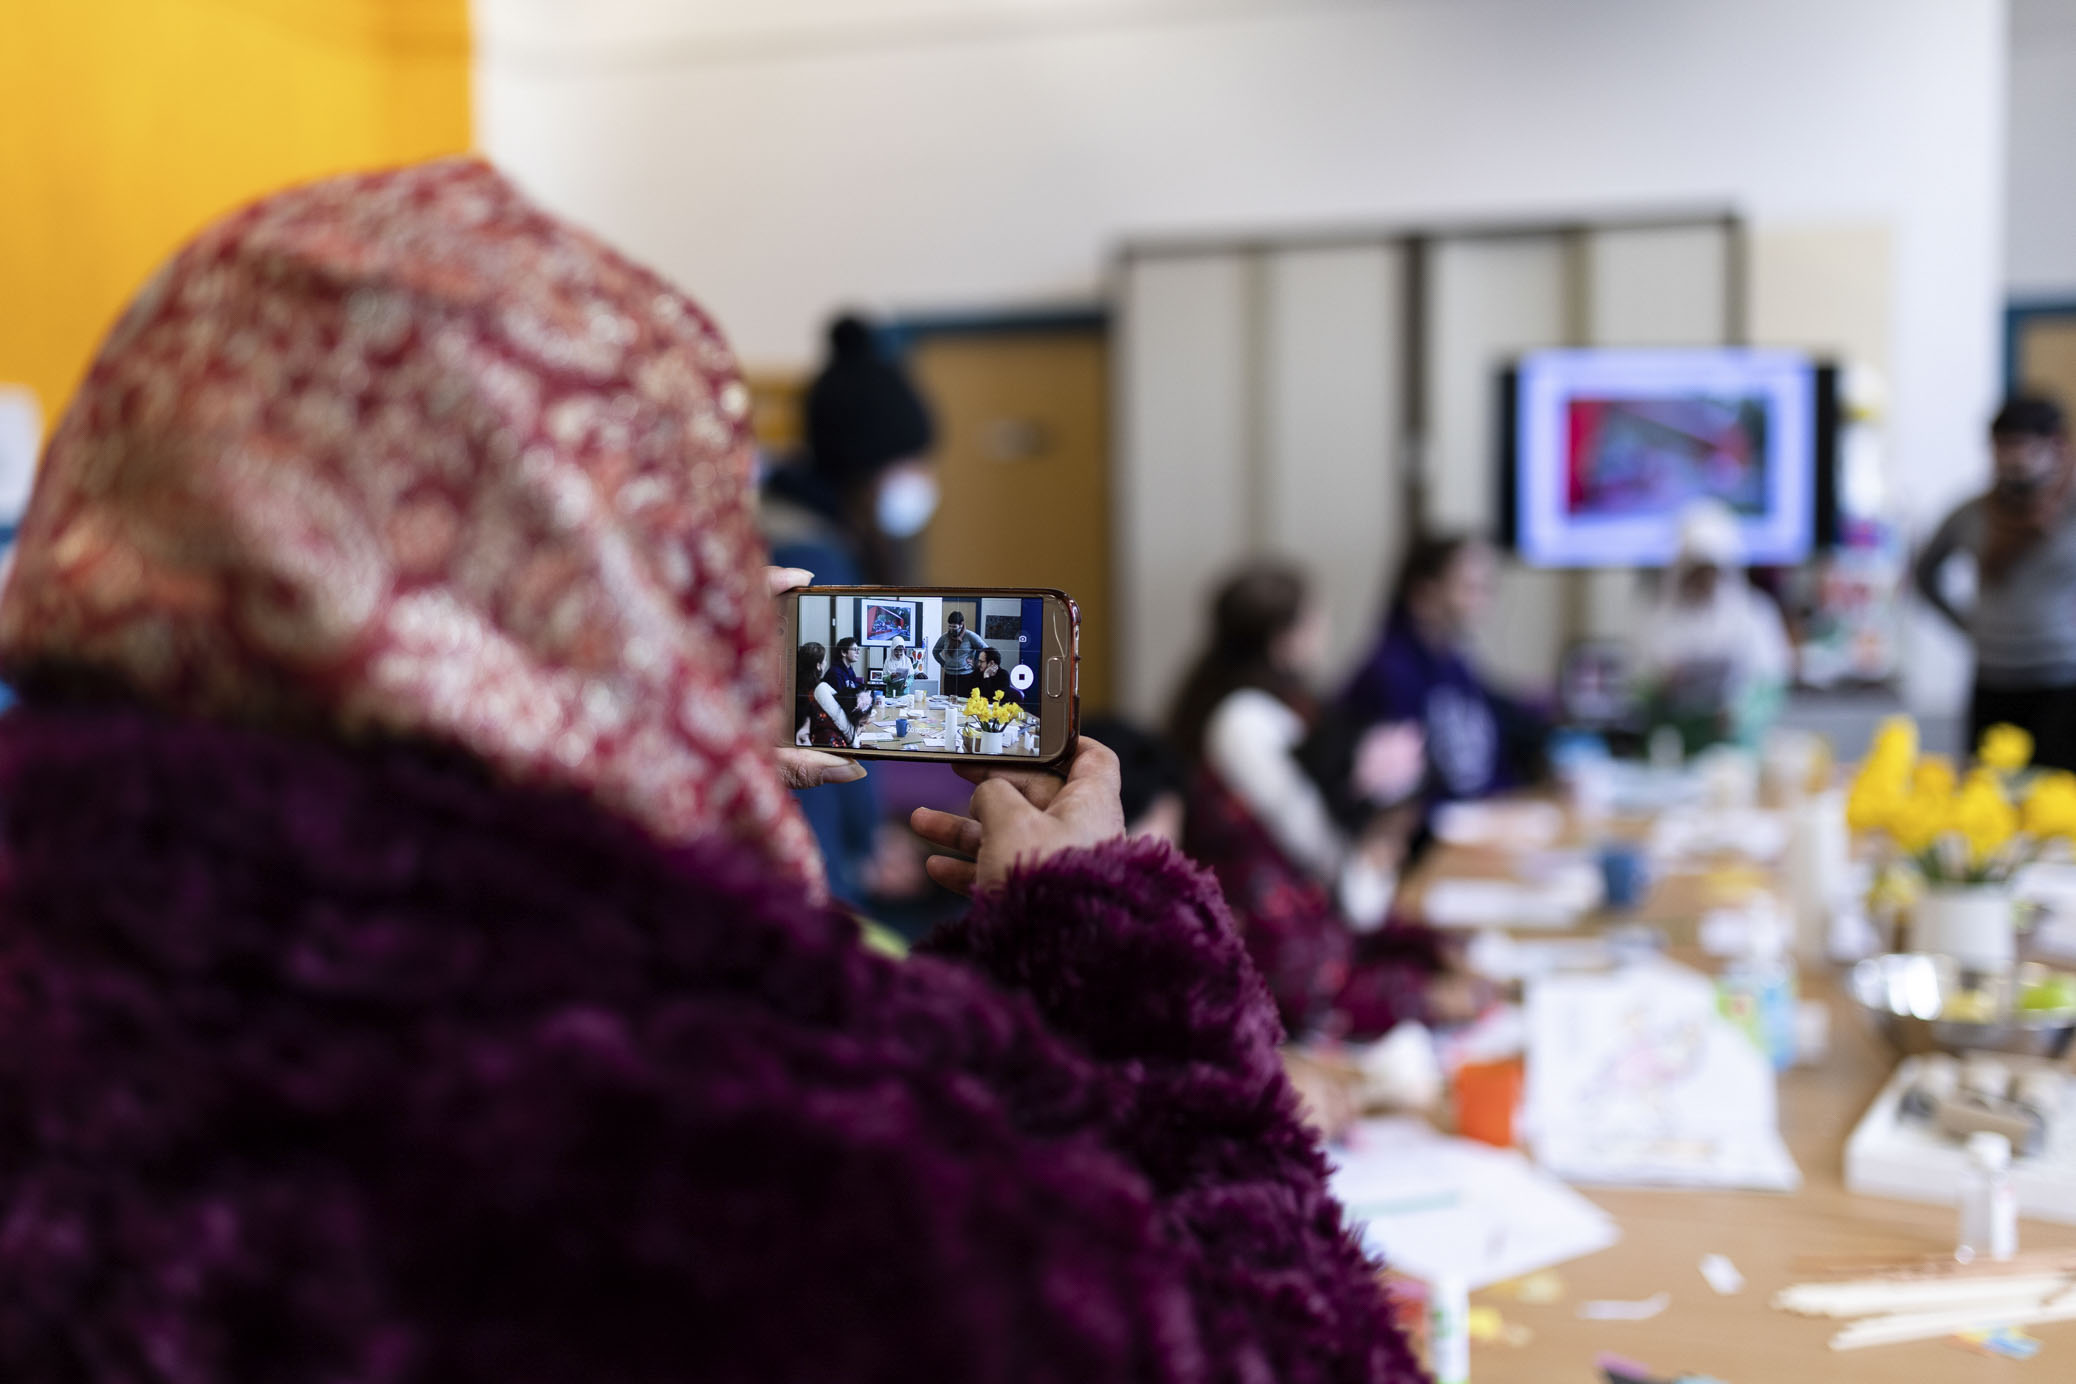 A woman wearing a hijab is taking a photograph of a group of people having a workshop.